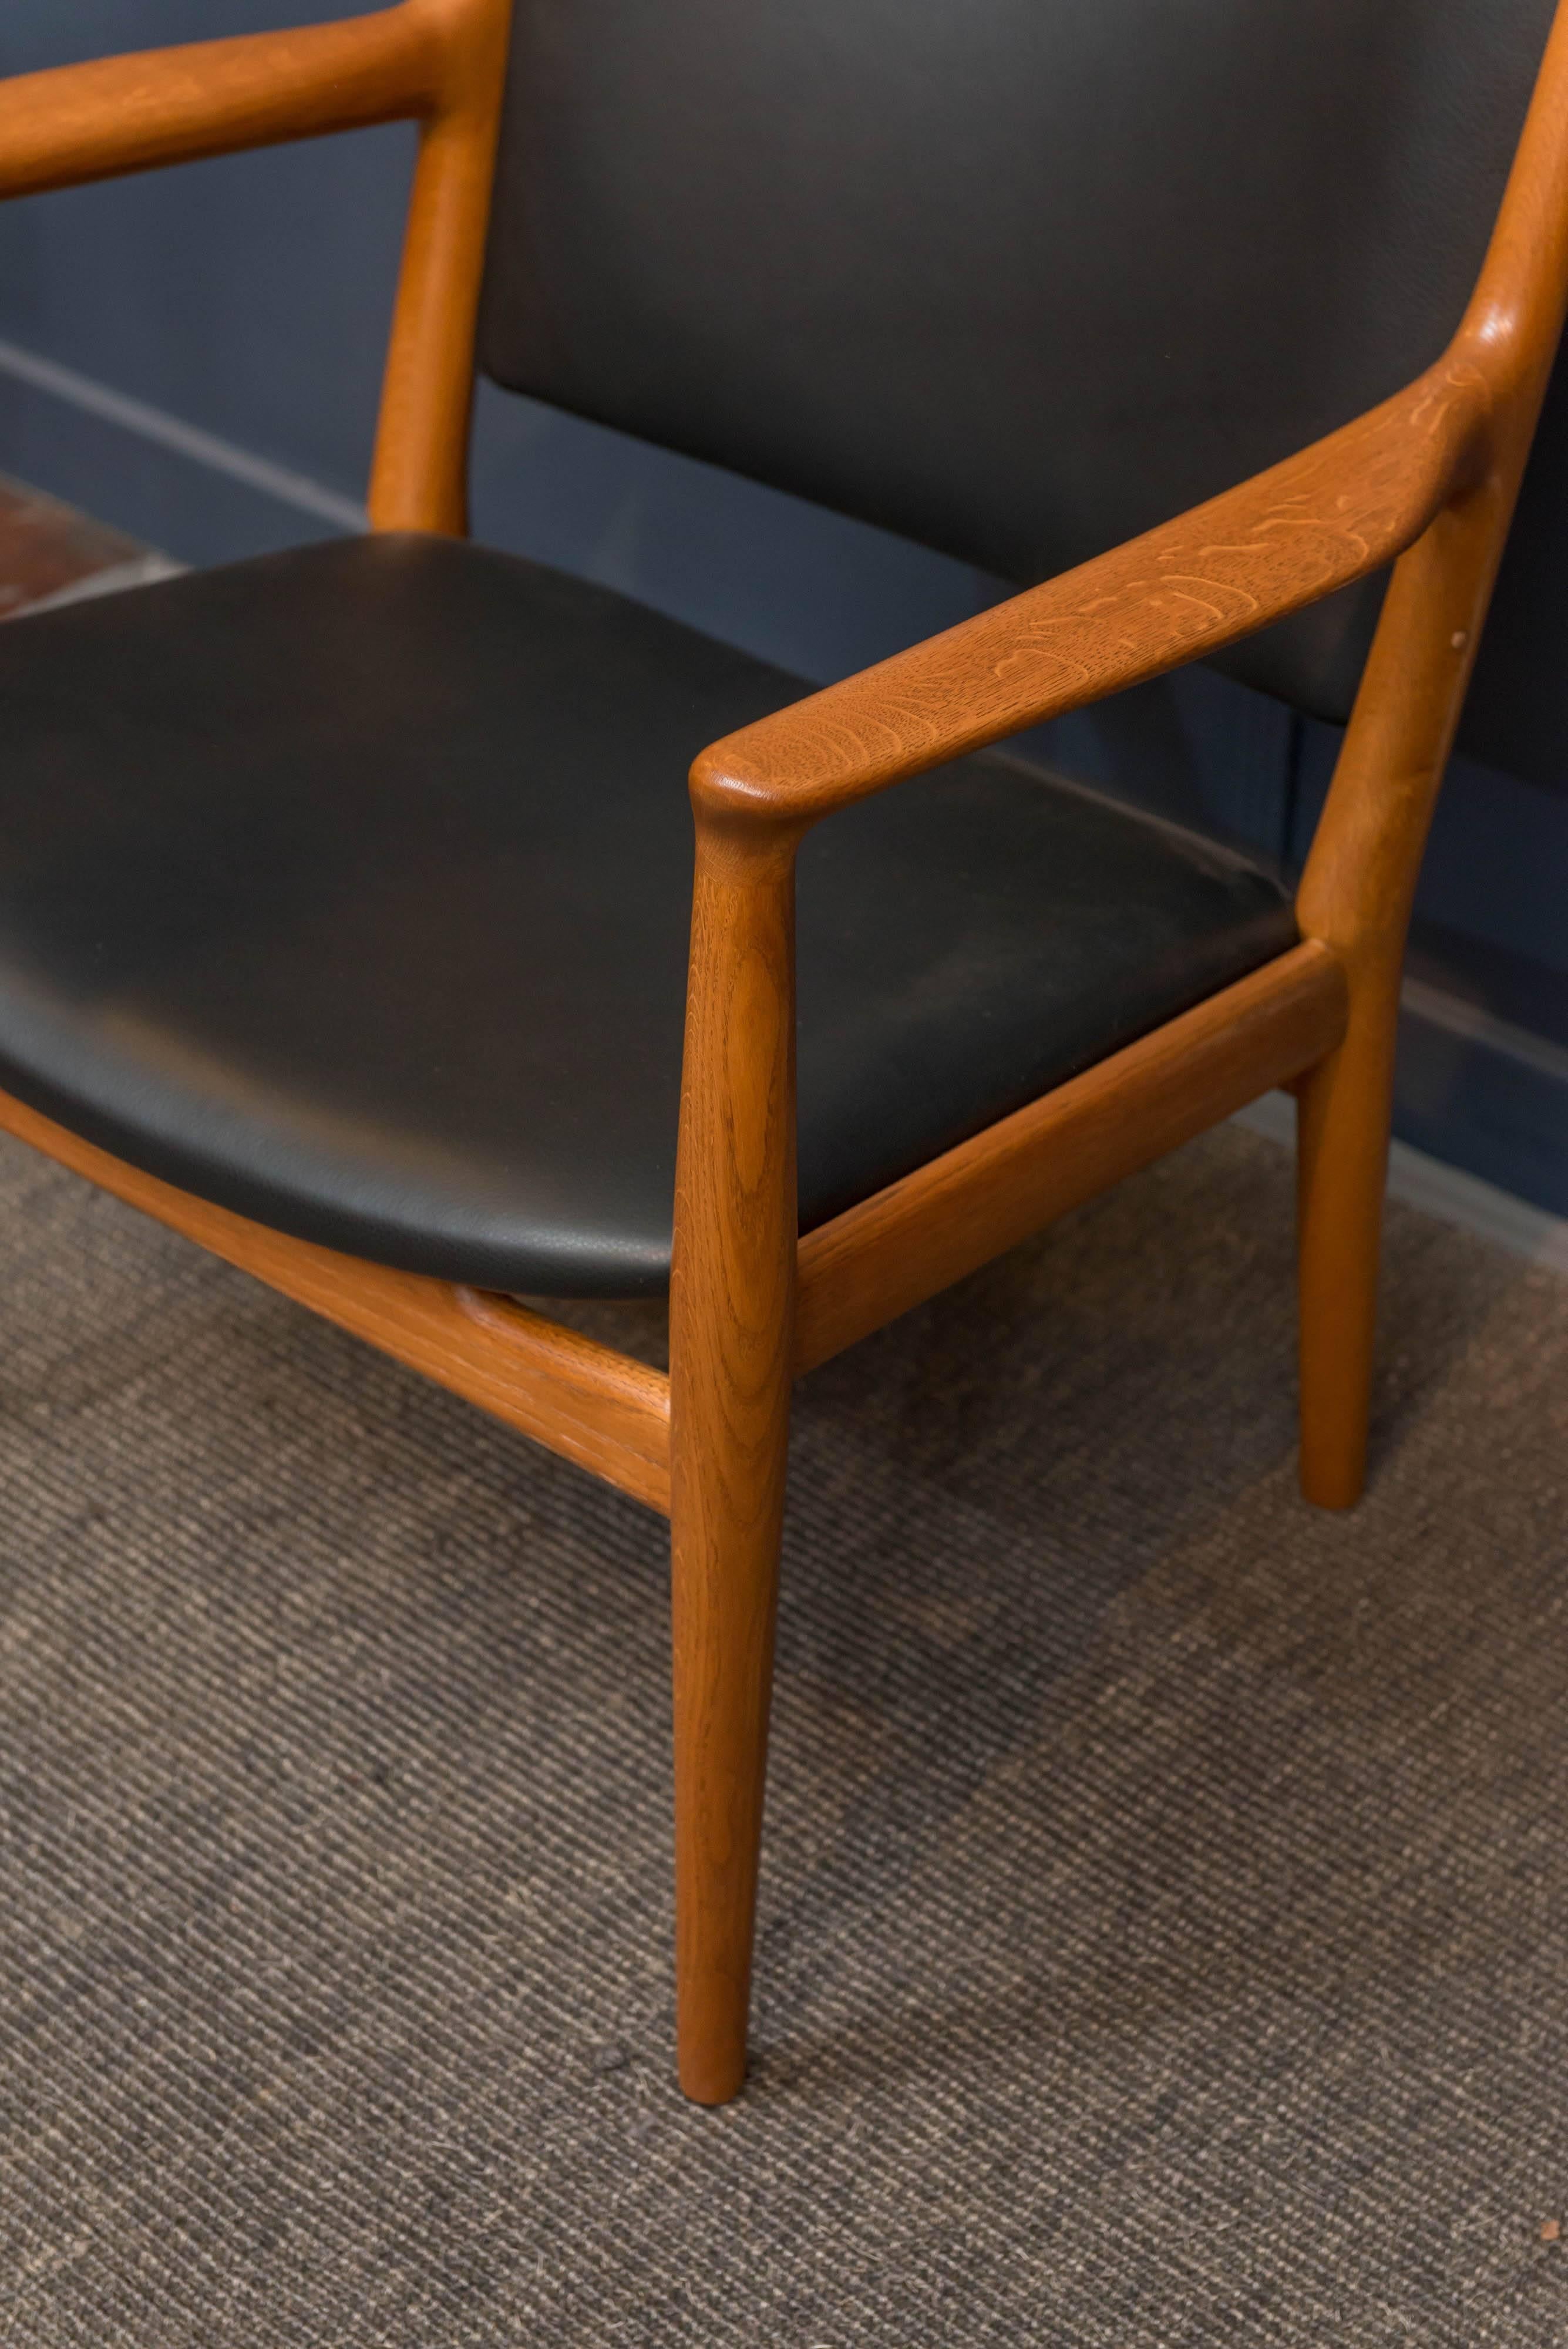 Hans J Wegner design oak and teak lounge chair model JH-713 for Johannes Hansen, Denmark.
Simple elegance combined with high quality construction and restorations make for the perfect robust lounge chair. 
New leather upholstery, labeled.